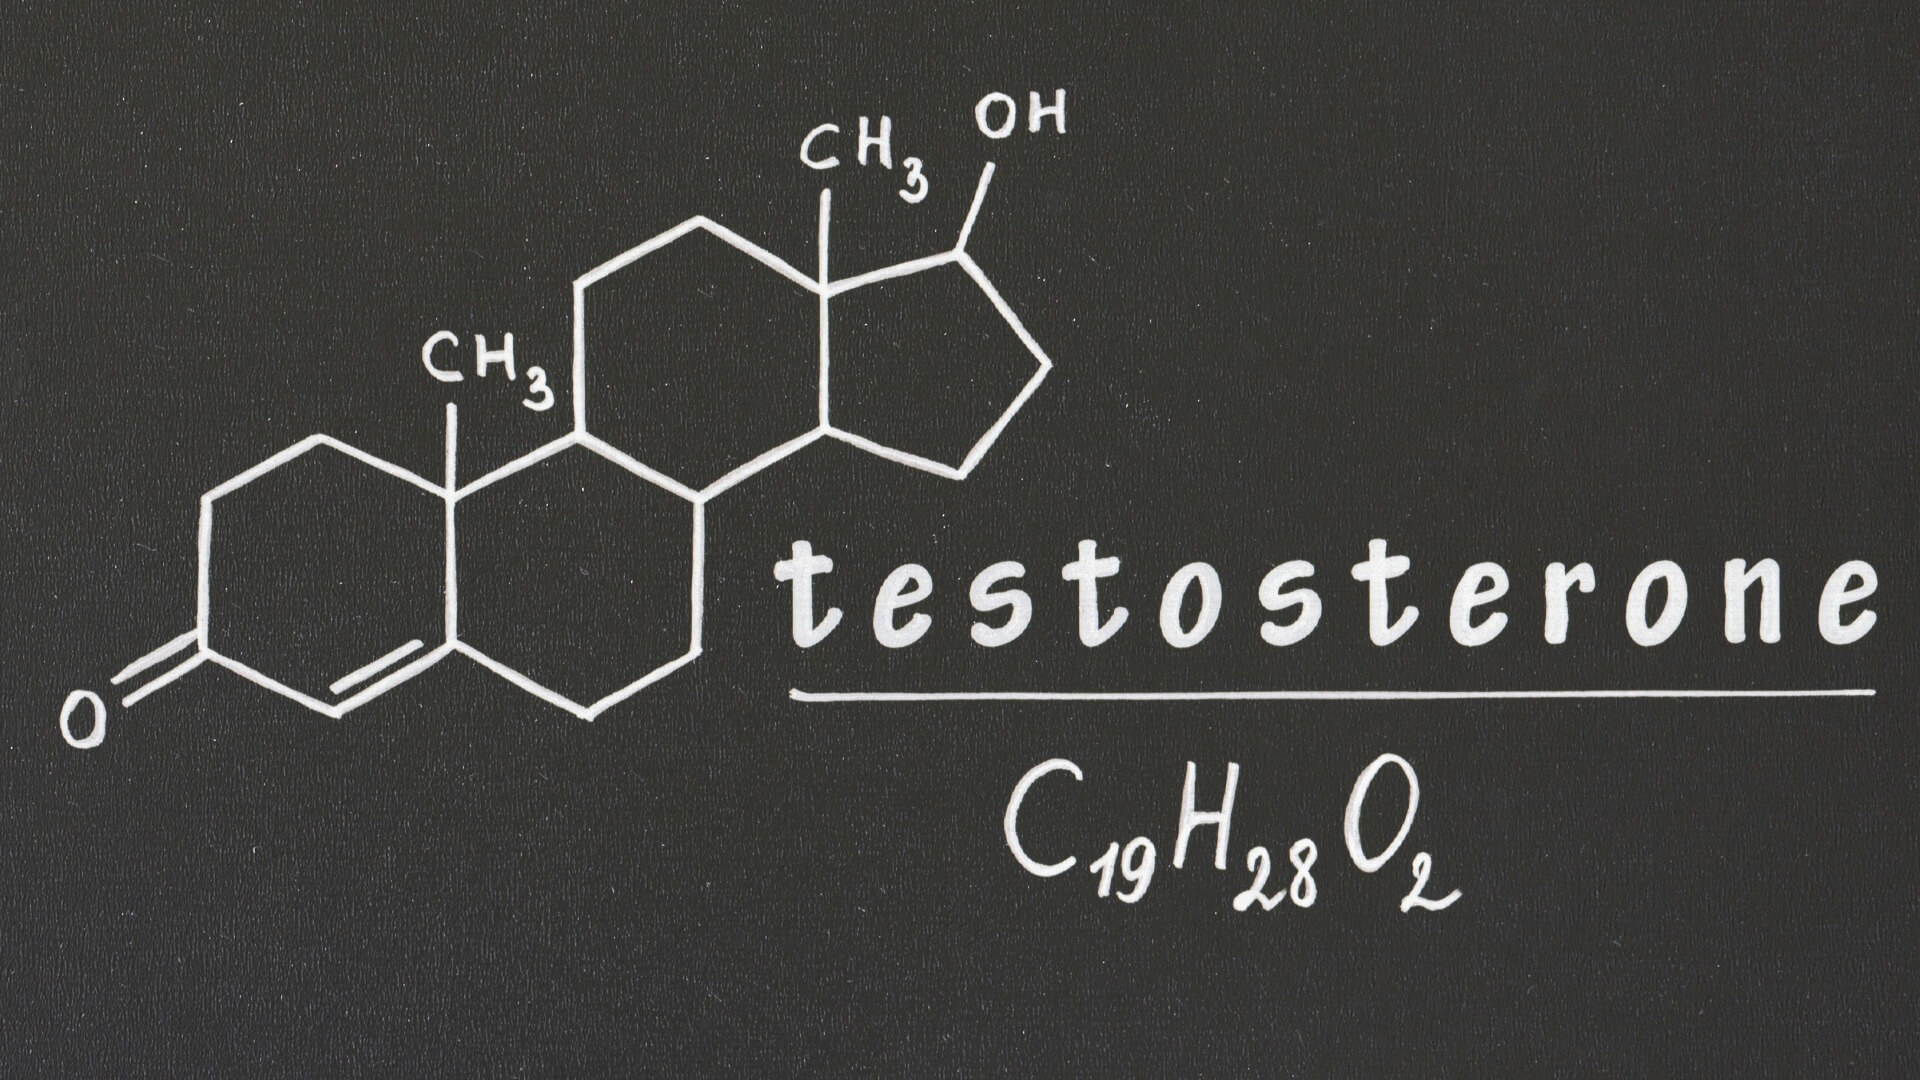 Advantages of synthesized testosterone